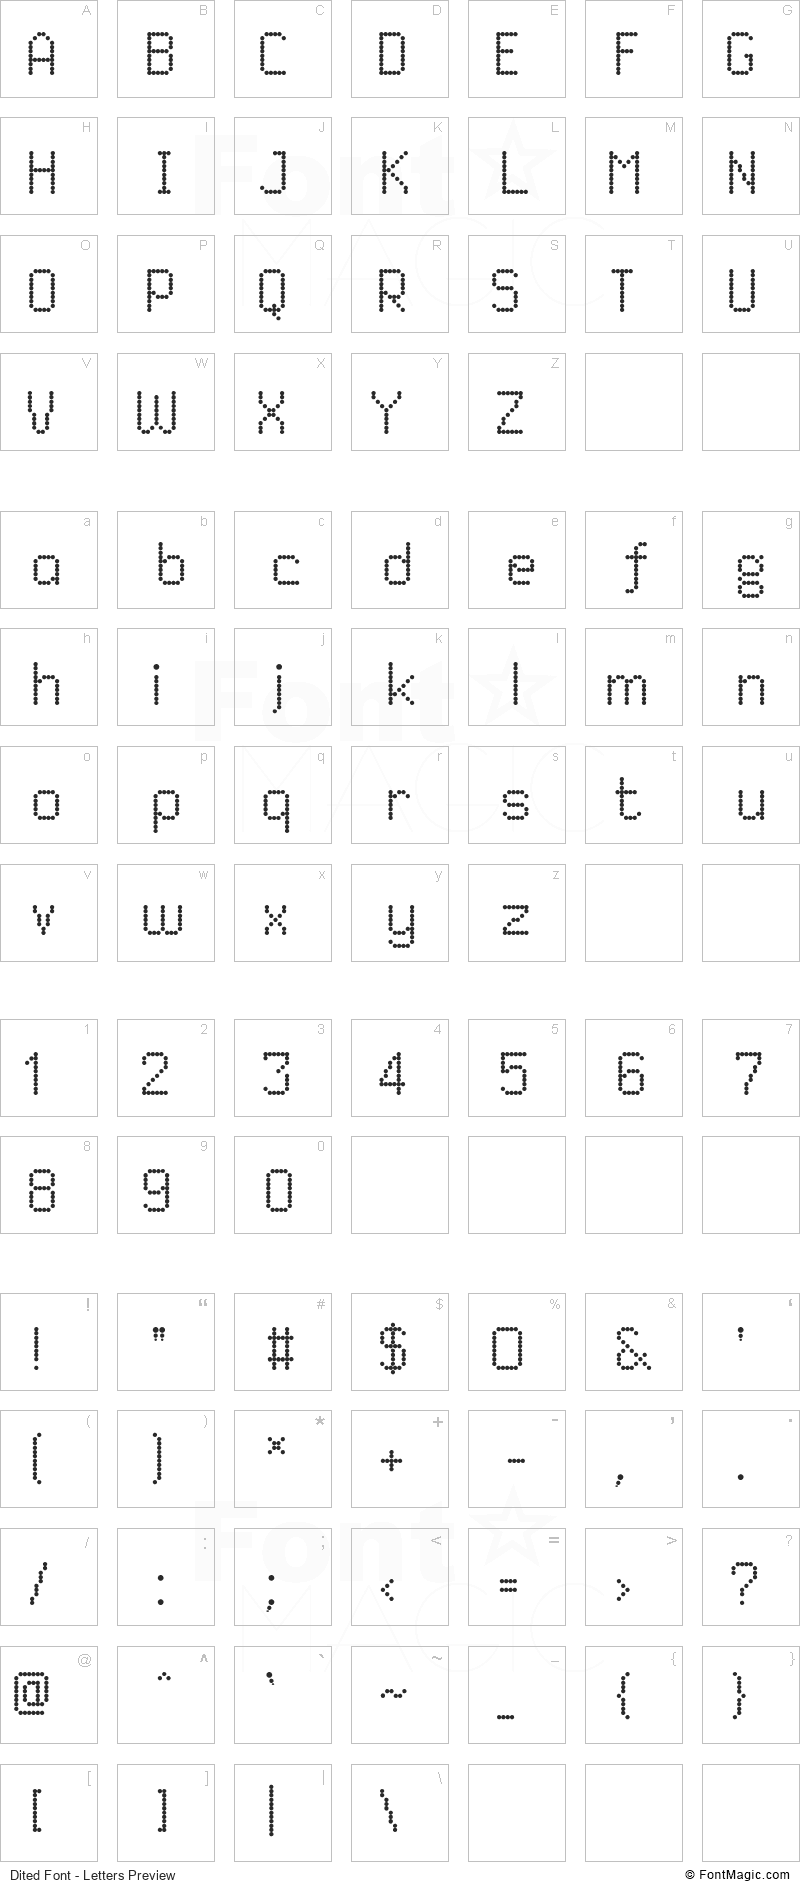 Dited Font - All Latters Preview Chart